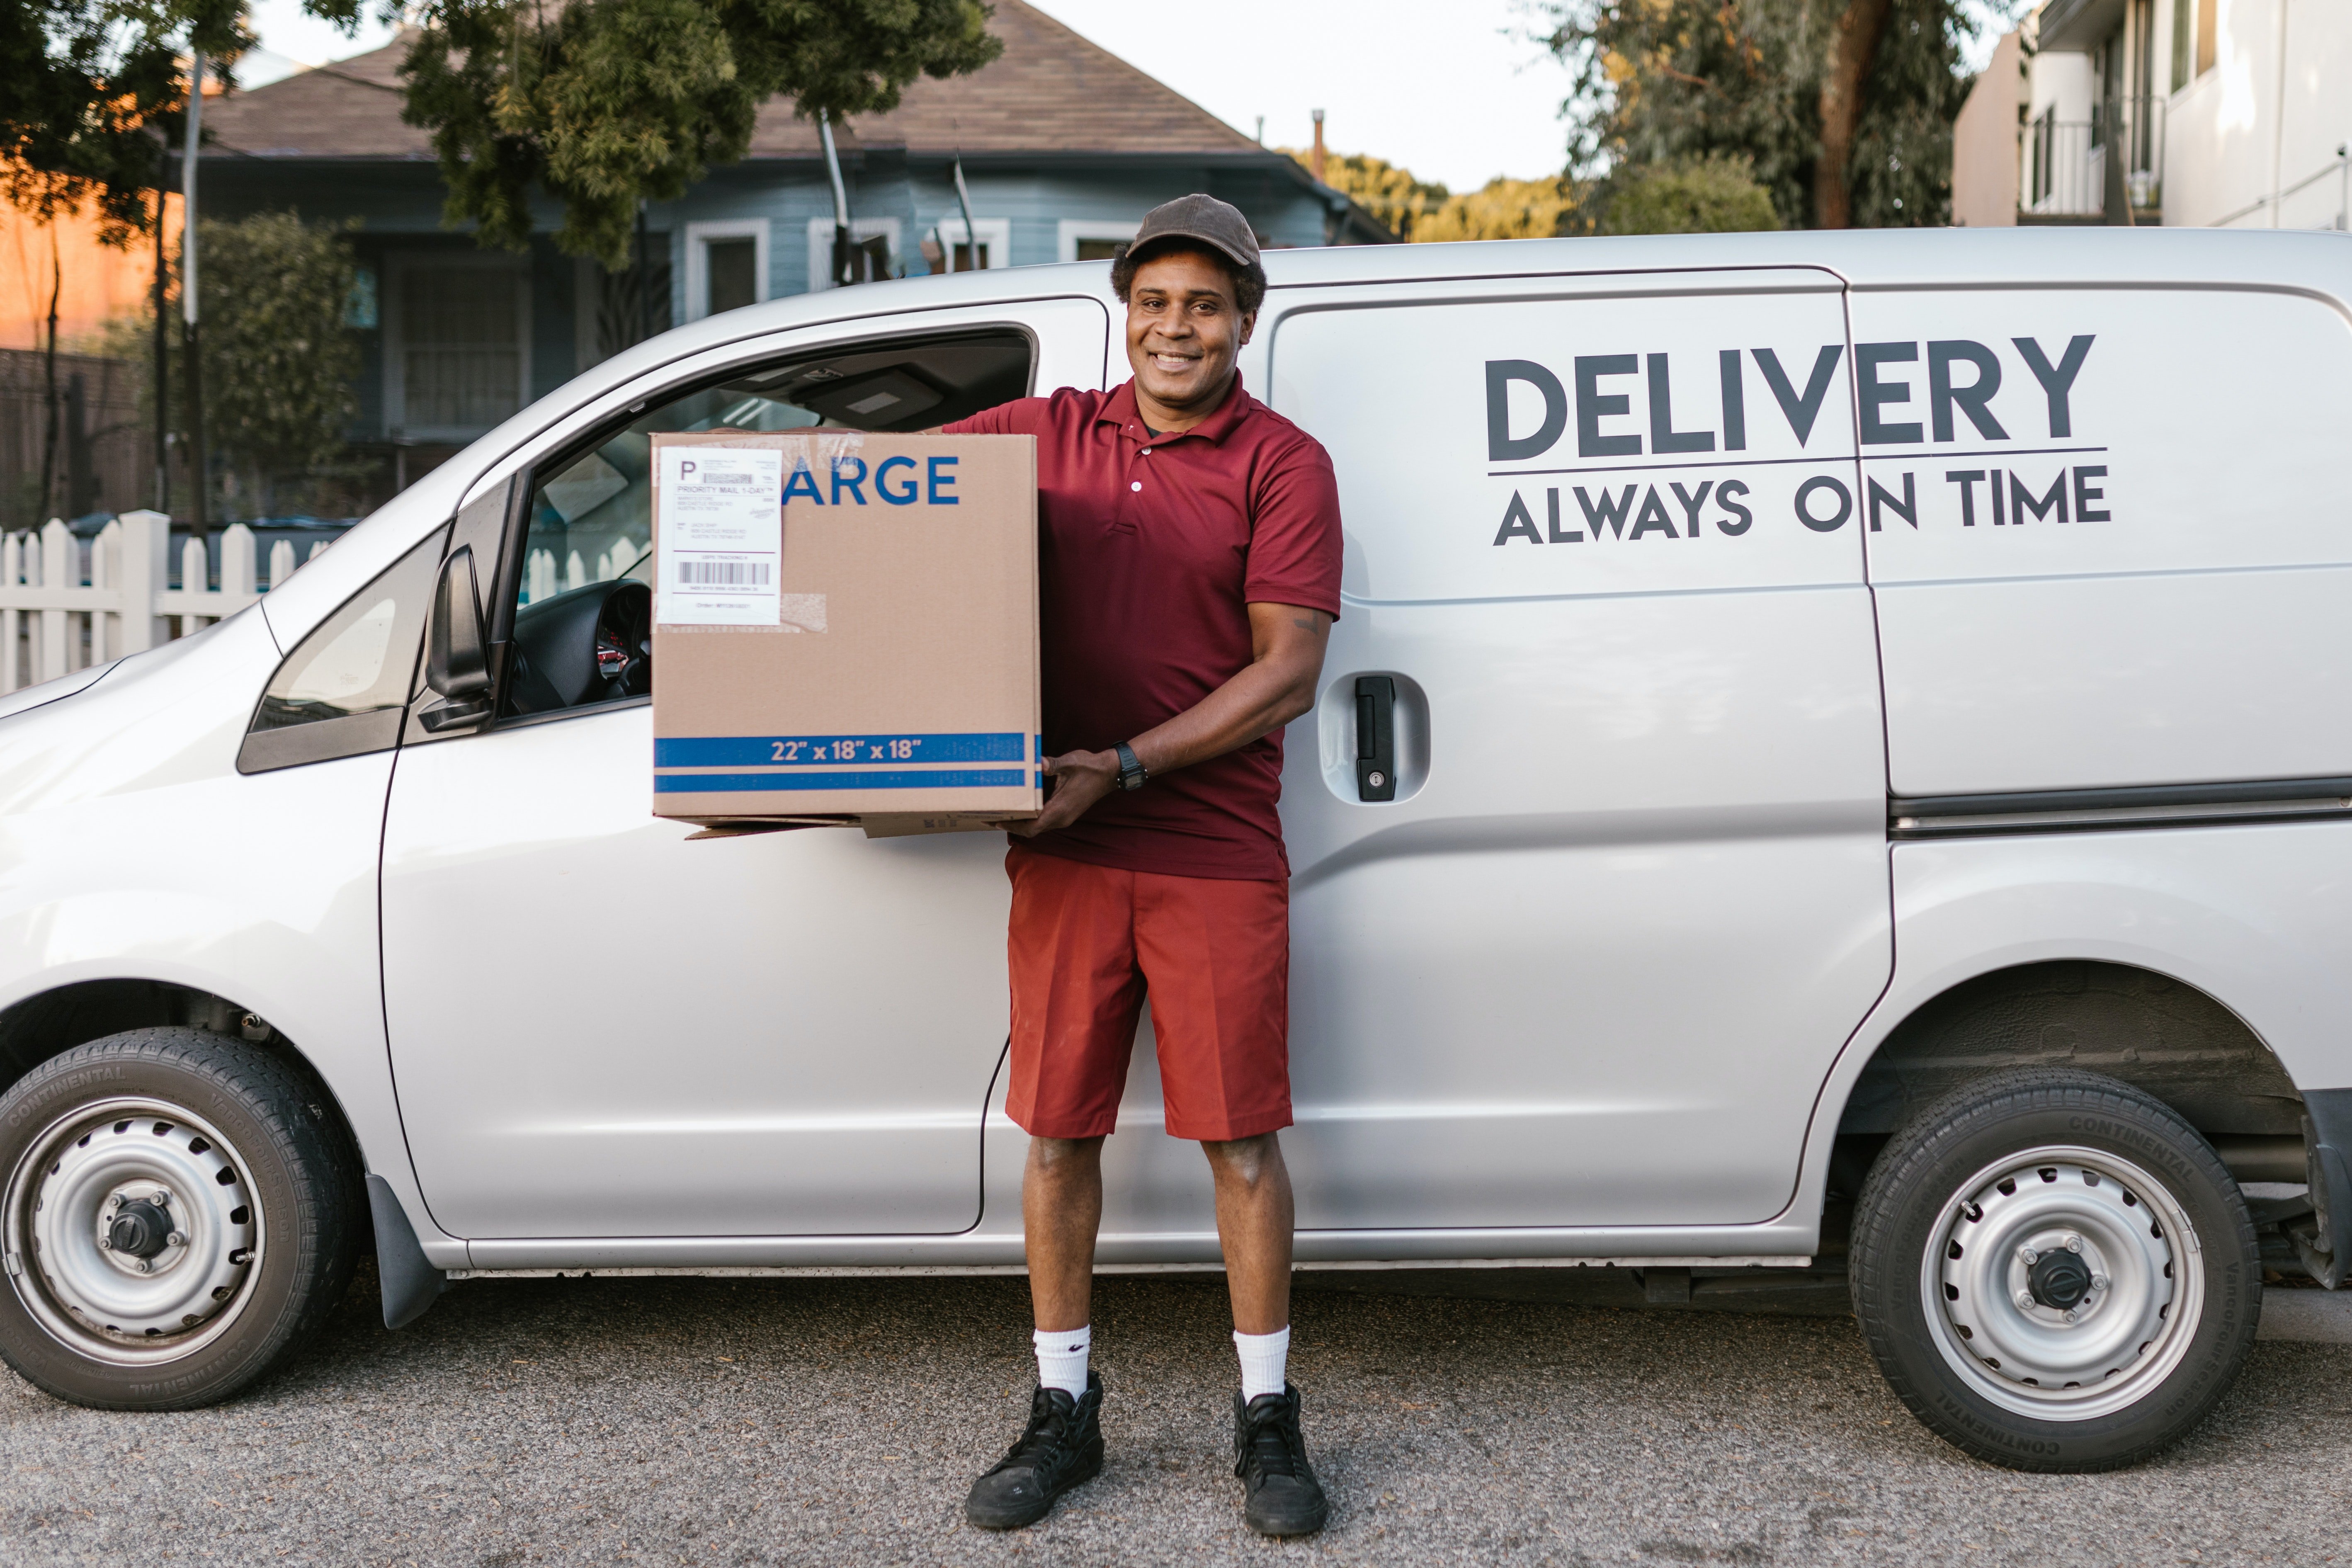 The delivery man delivered the box at Stella's house and drove away. | Source: Pexels